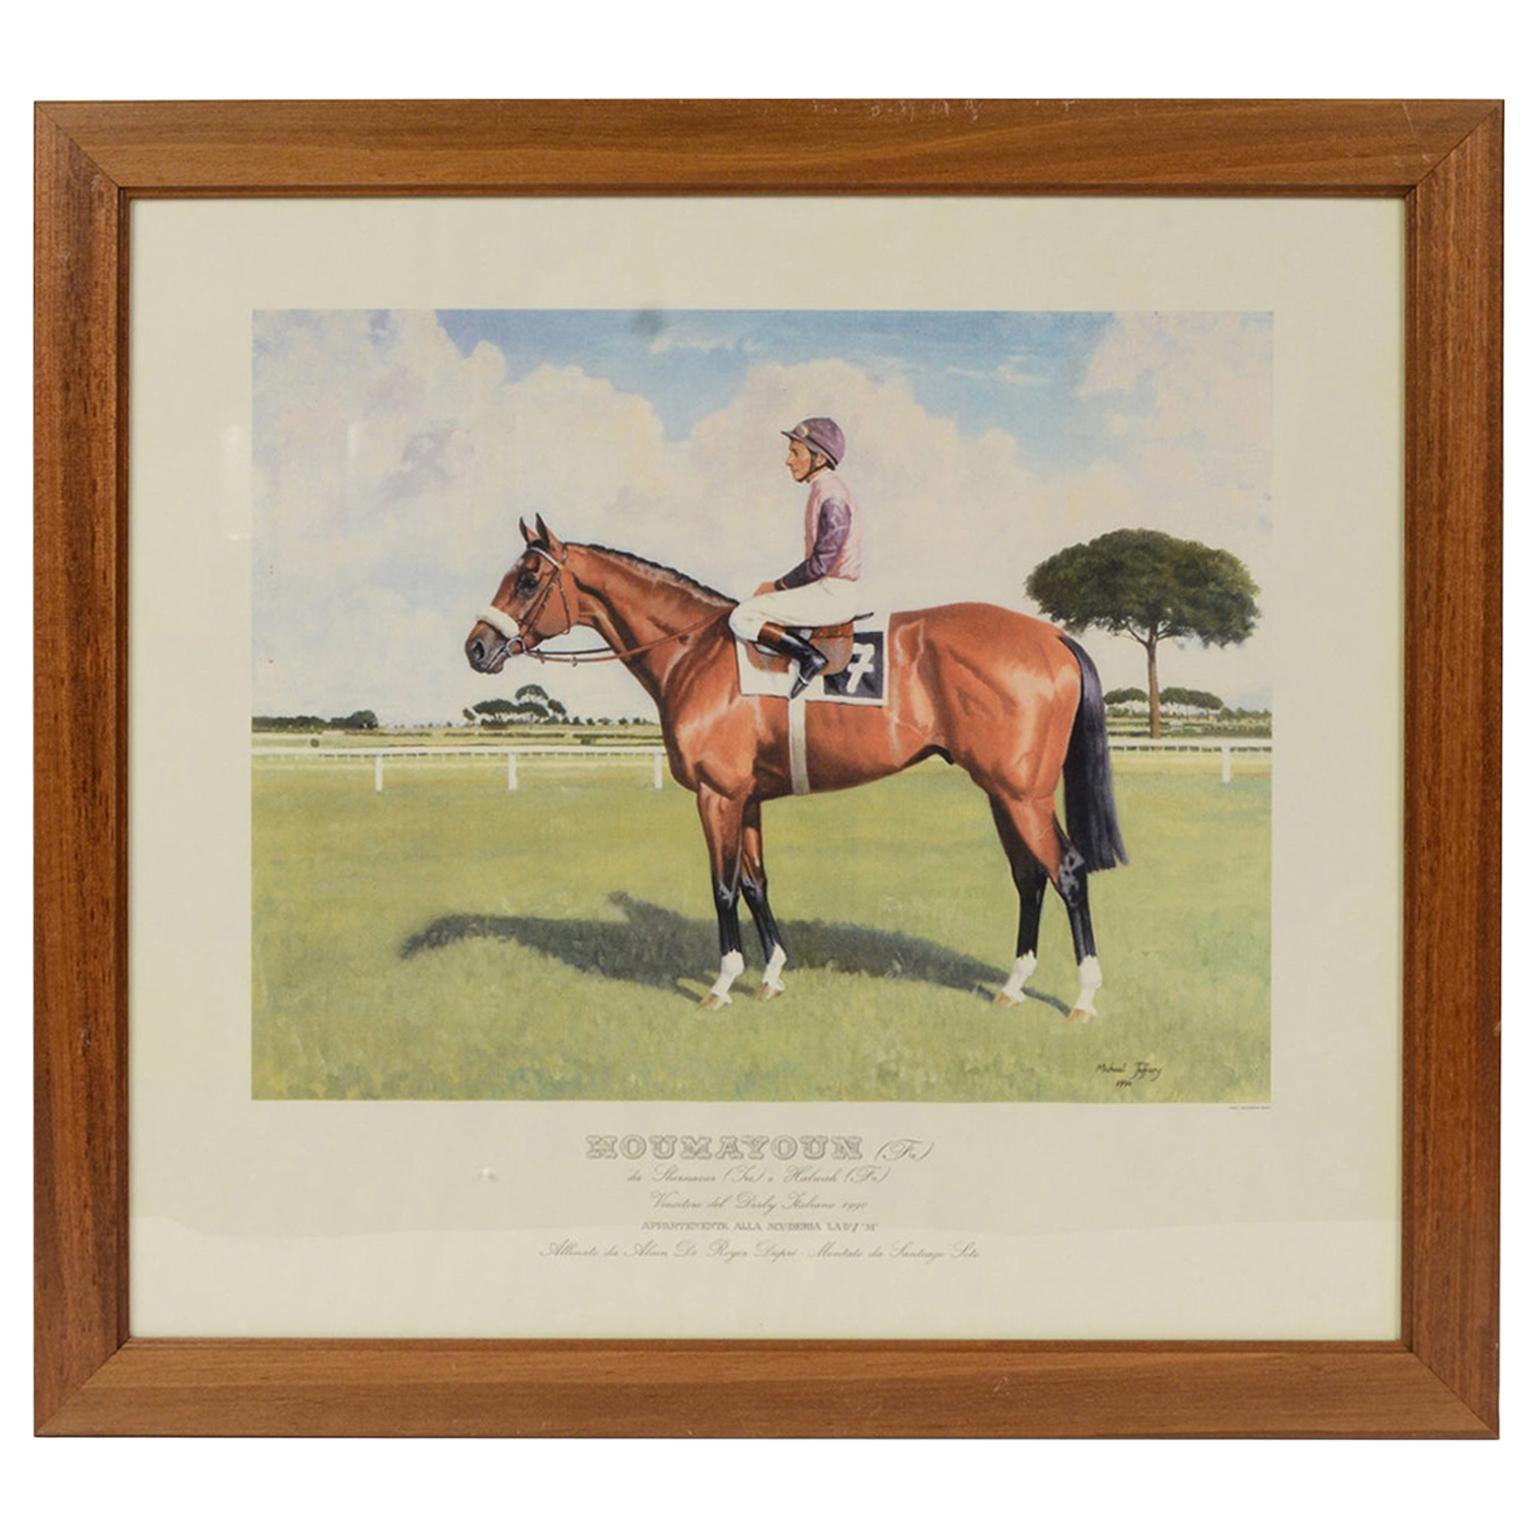 Lithograph Depicting the Horse Winner of the 1990 Italian Derby For Sale